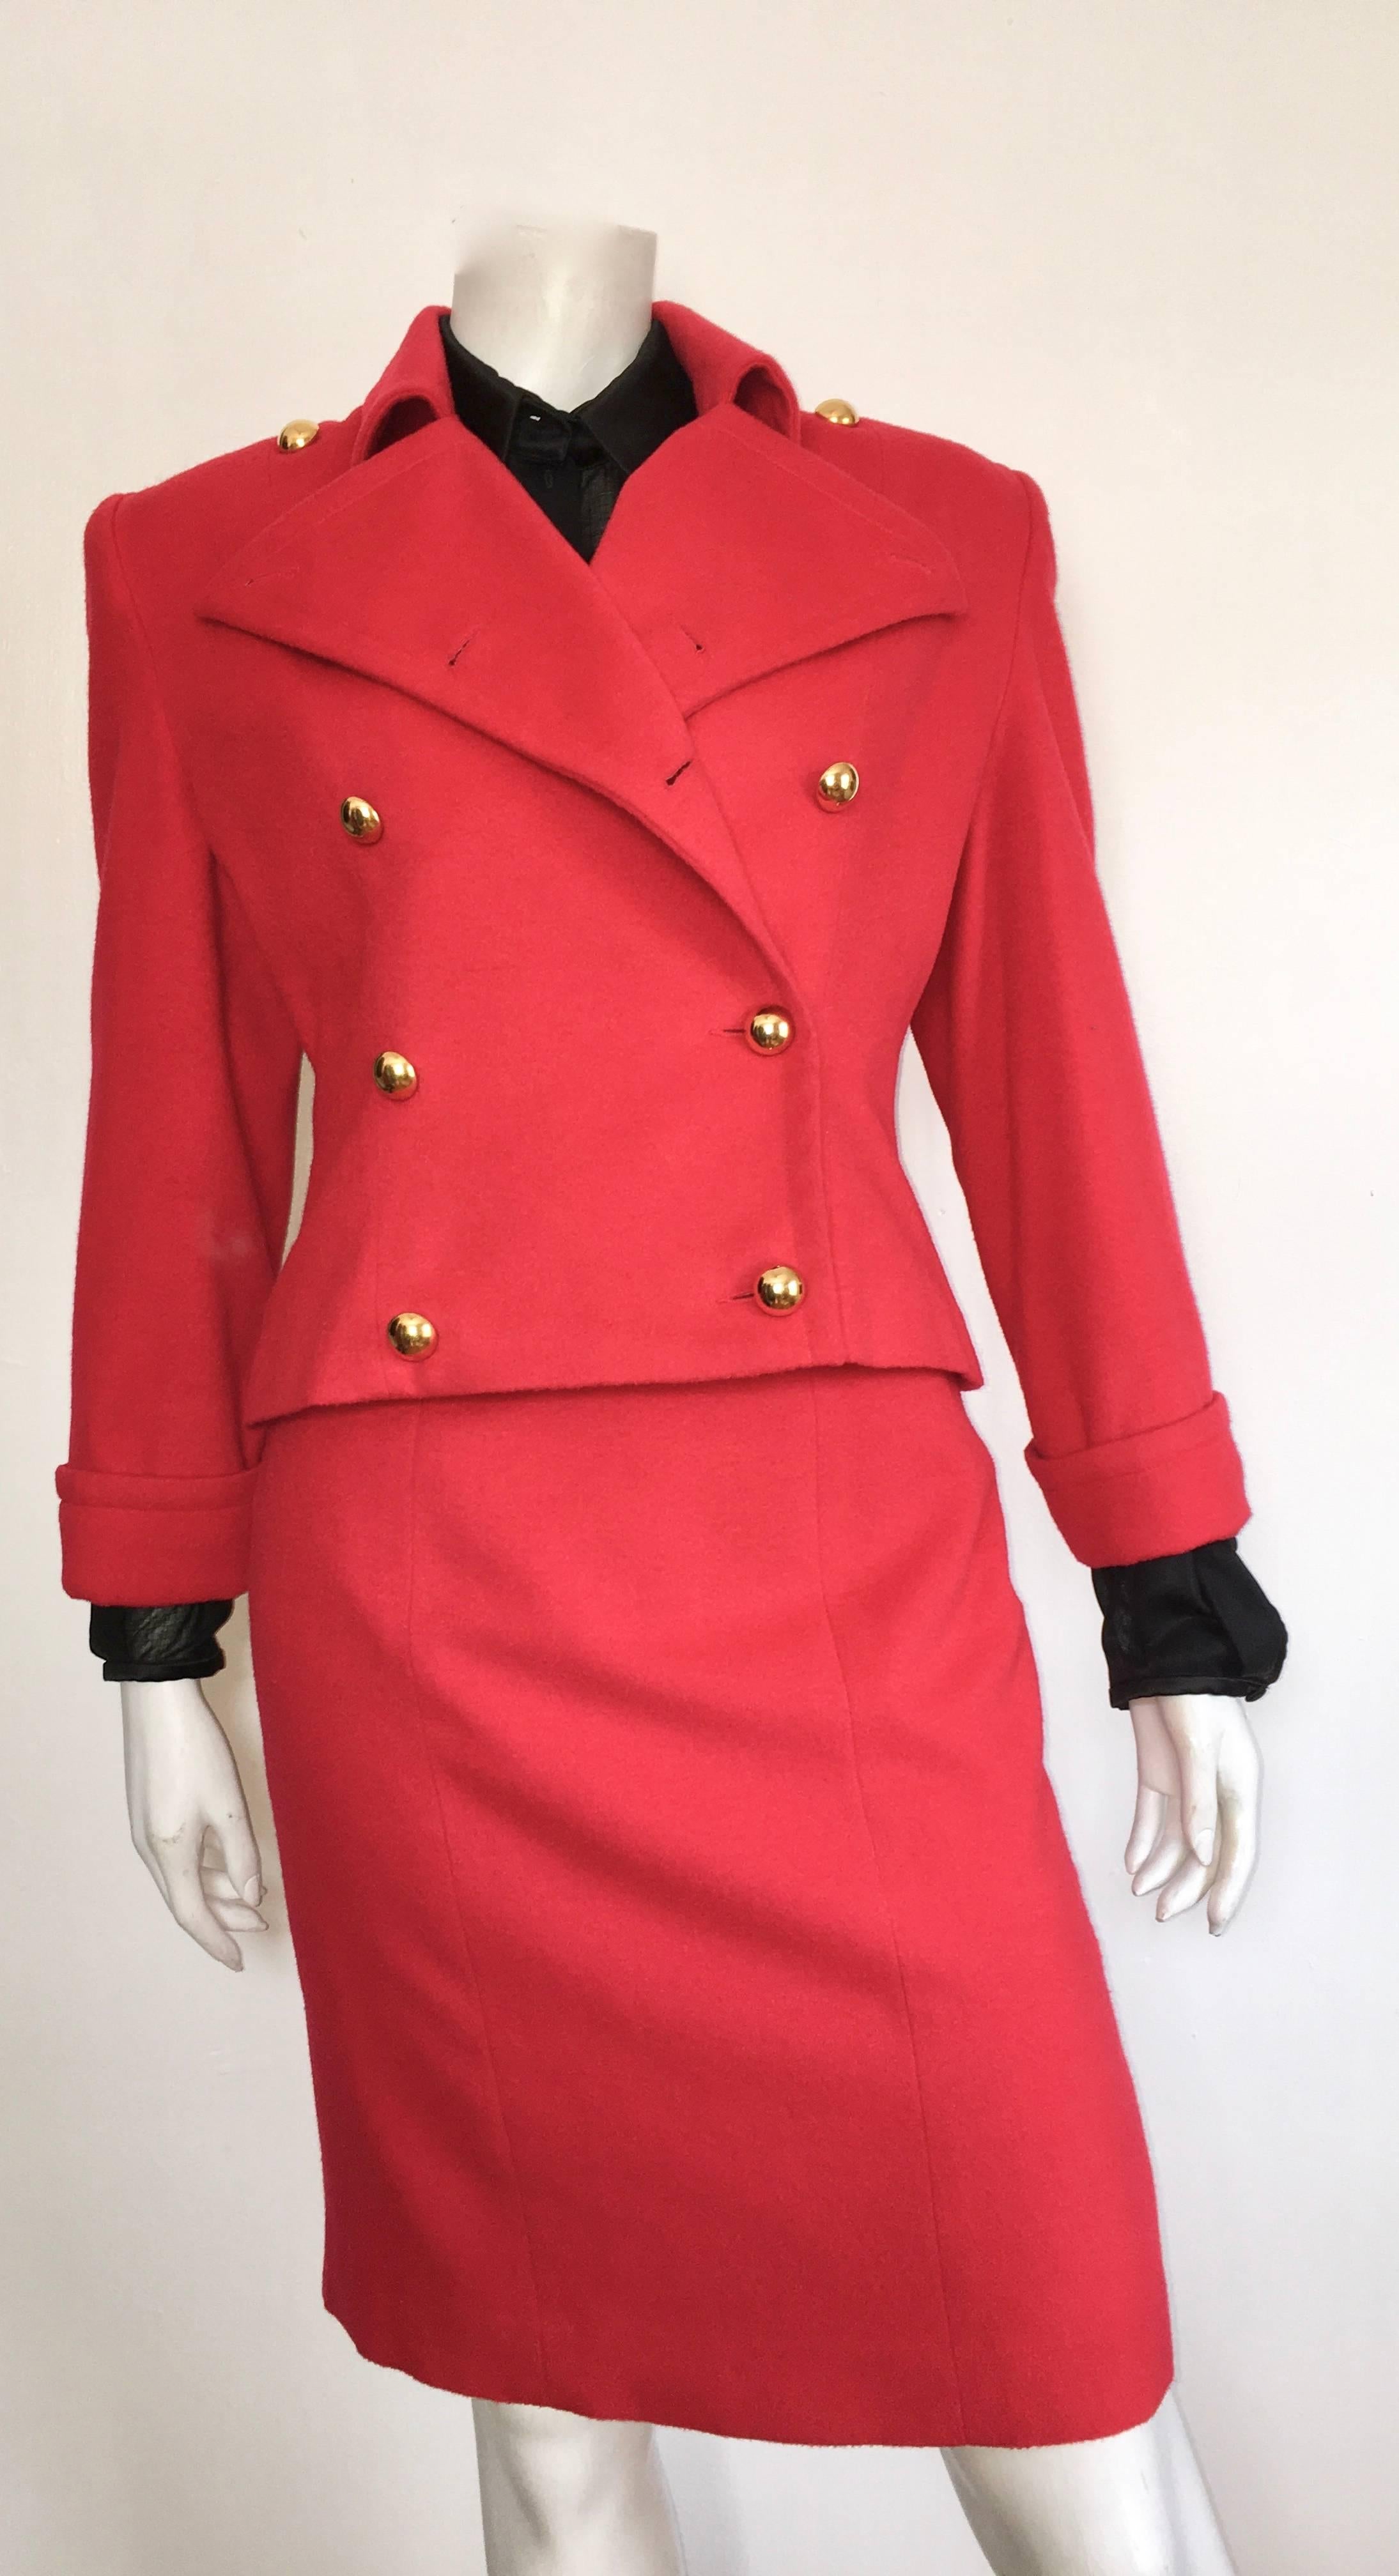 Patrick Kelly 1980s red wool jacket & high waisted skirt is labeled a size 6. The waist in the skirt is 28